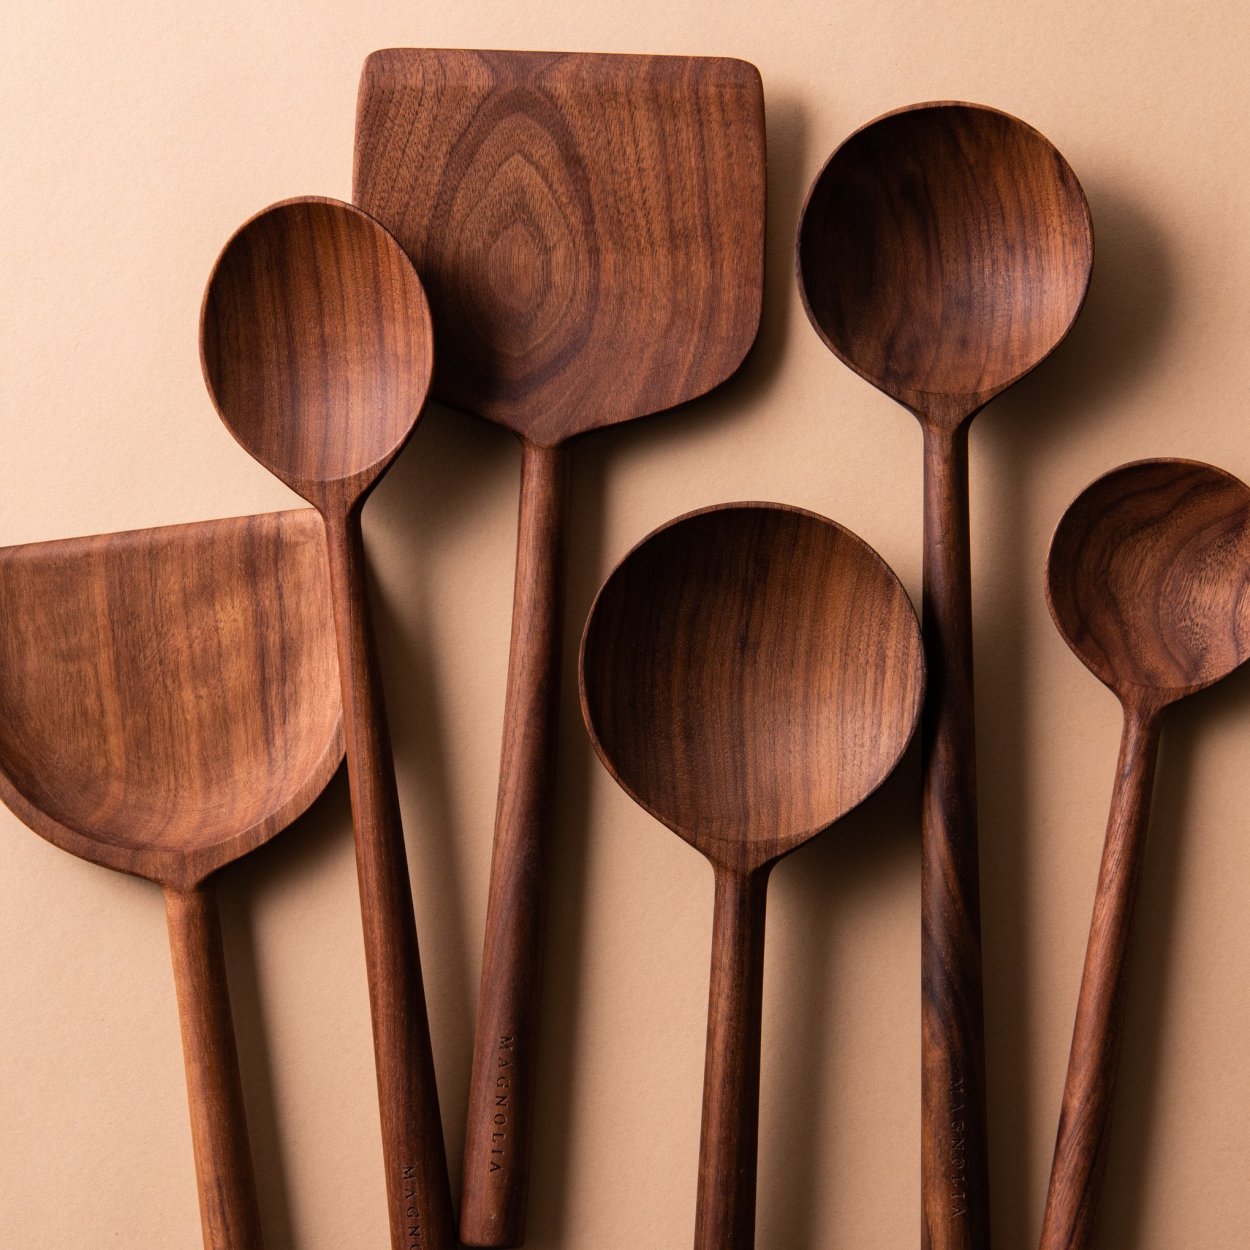 Walnut and Copper Measuring Spoons - Magnolia